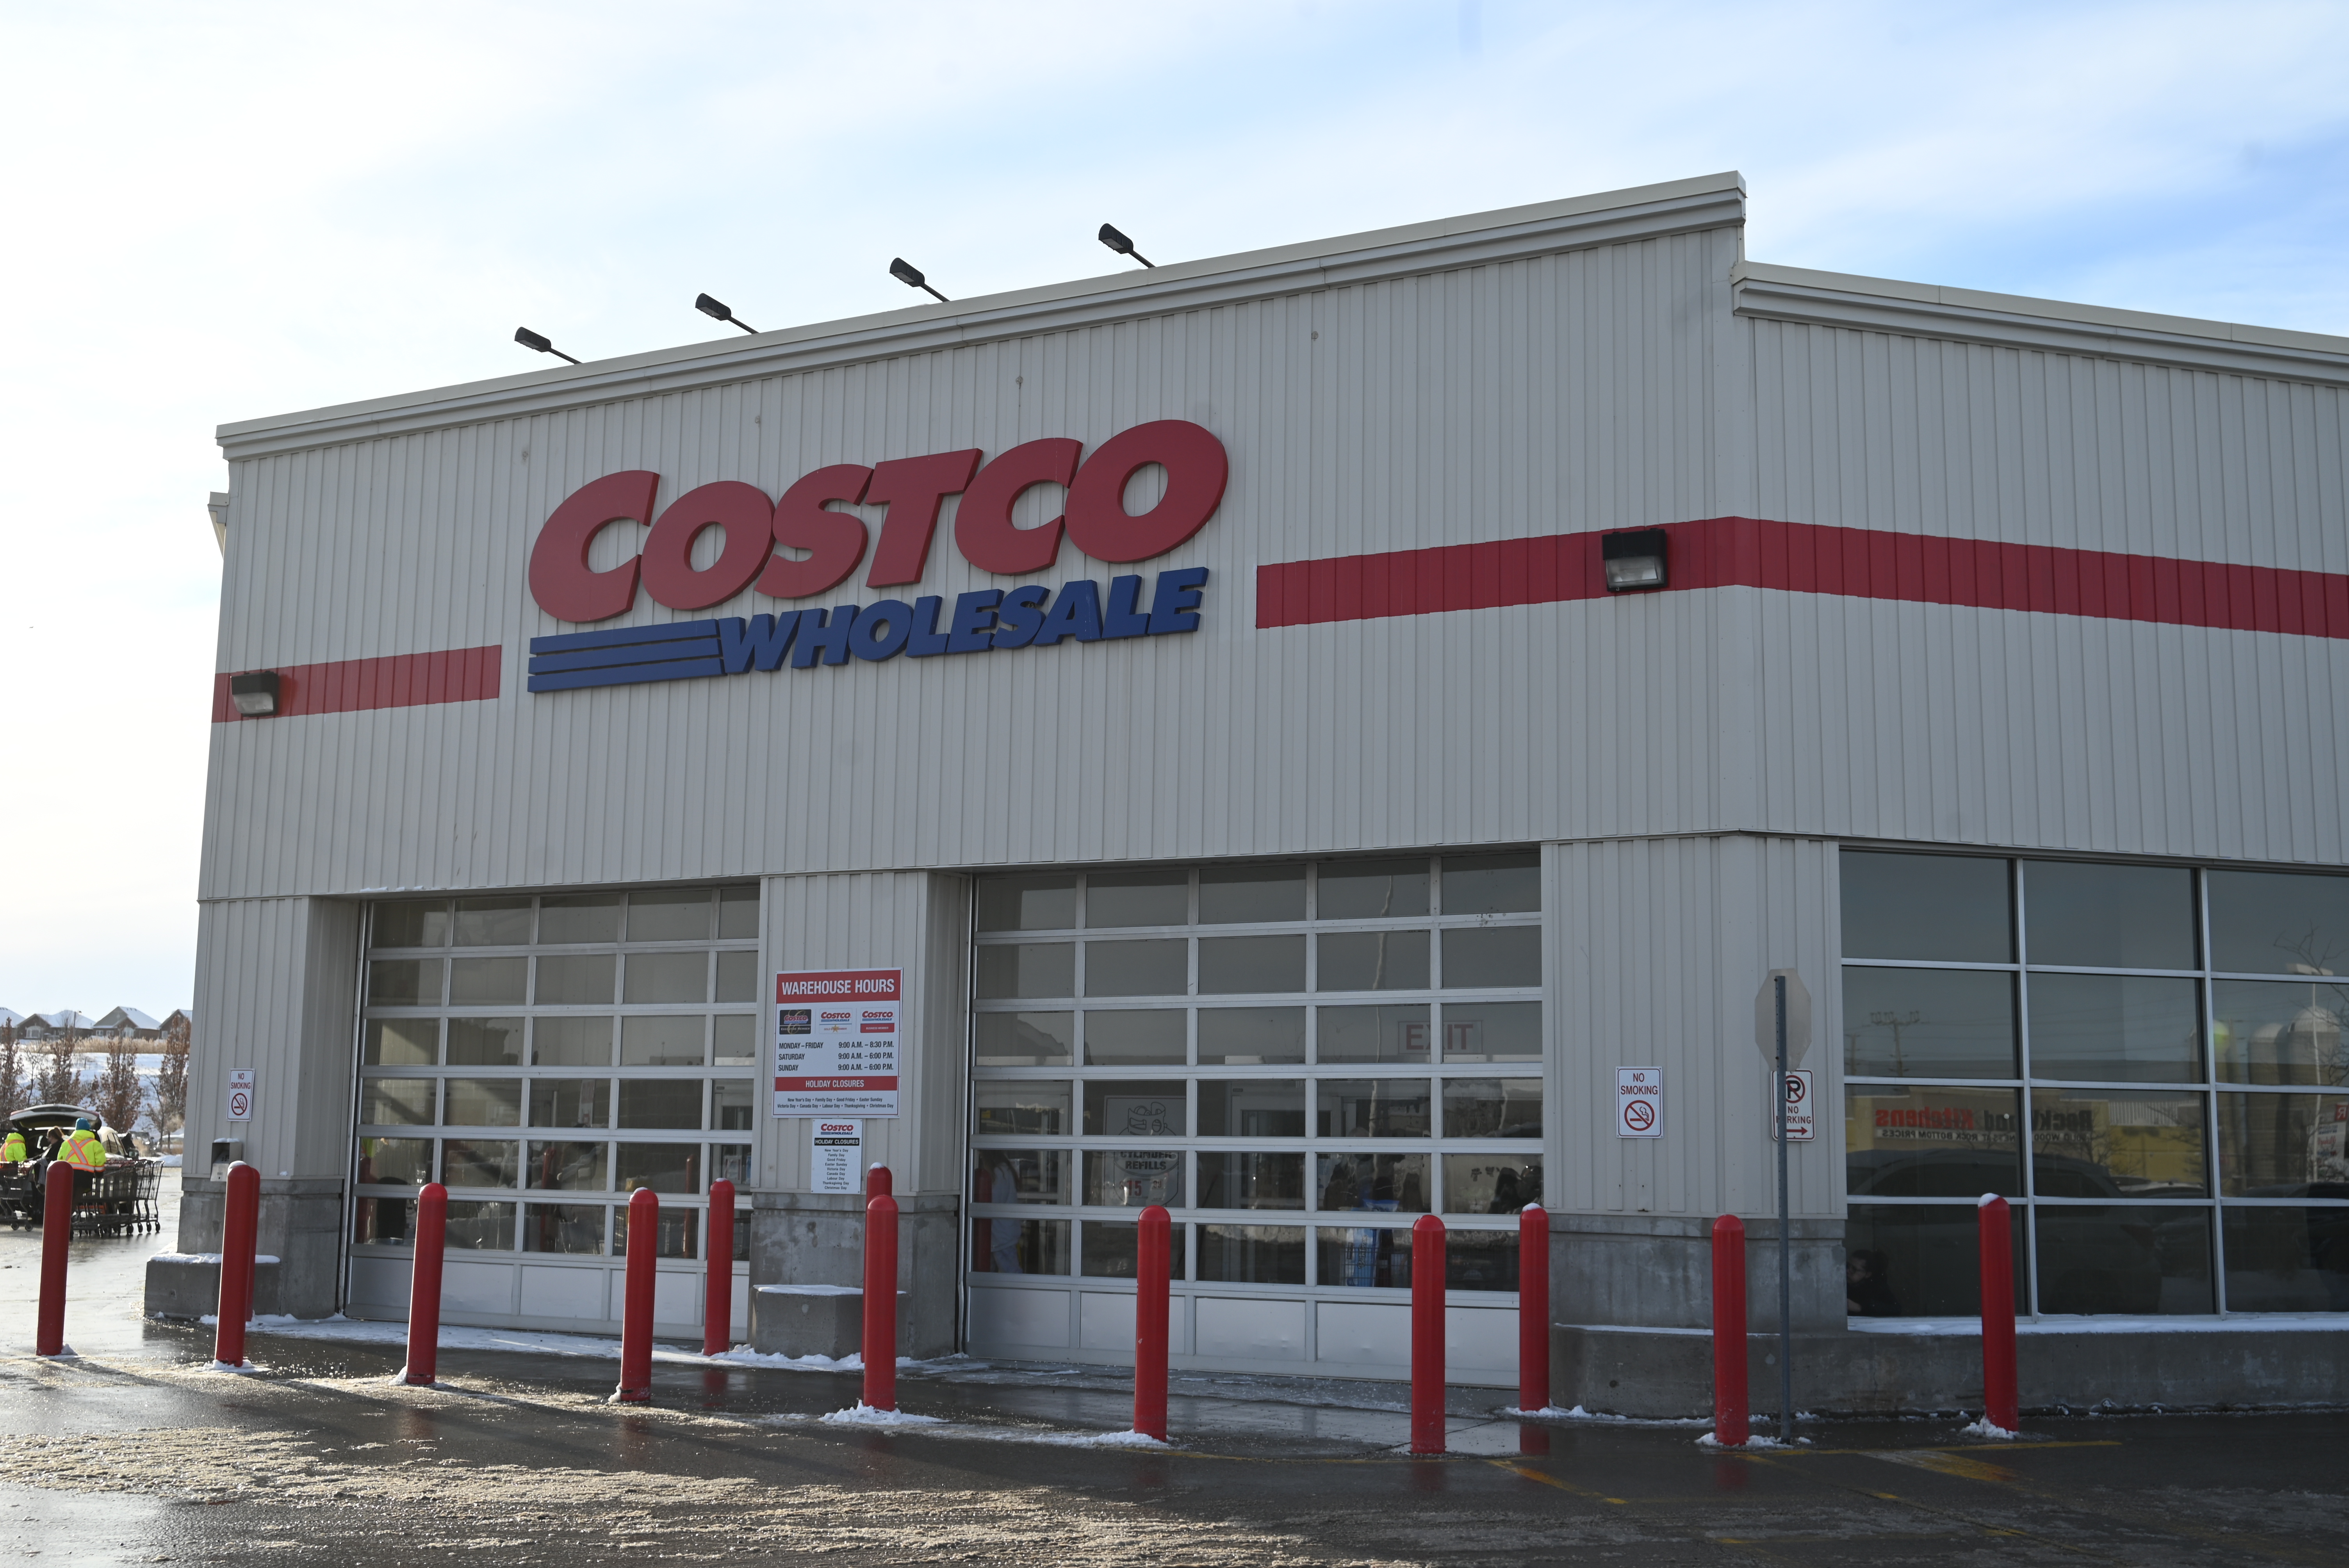 East Gwillimbury Costco slated to become business centre - Bradford News